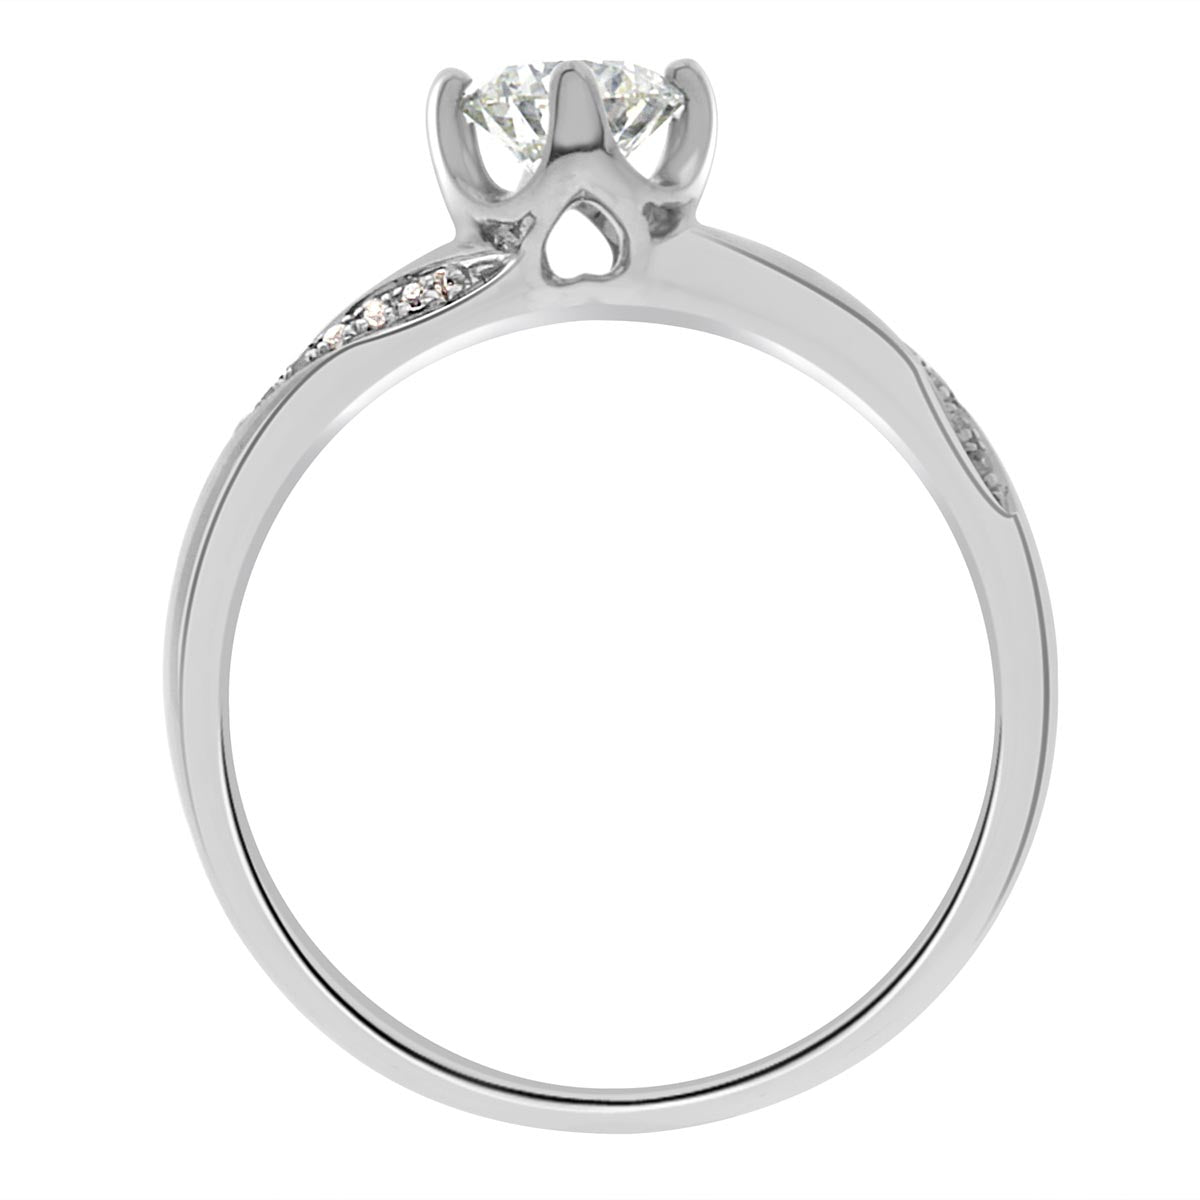 Crossover Band Engagement Ring made from white gold standing vertical